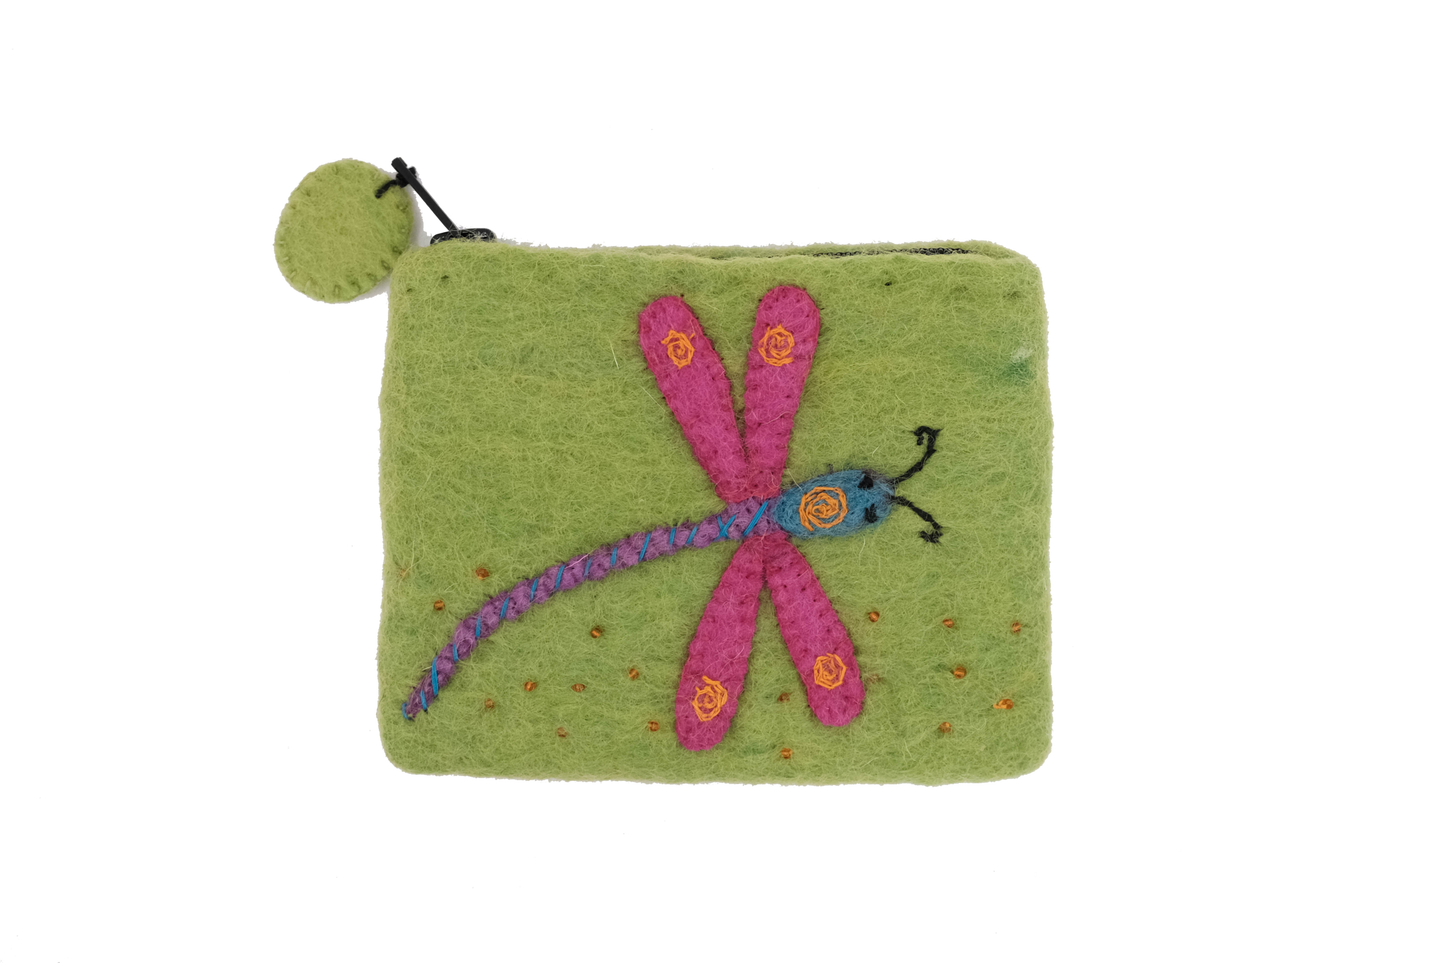 This Global Groove Life, handmade, ethical, fair trade, eco-friendly, sustainable, green felt zipper coin pouch was created by artisans in Kathmandu Nepal and is adorned with an adorable pink and blue dragonfly